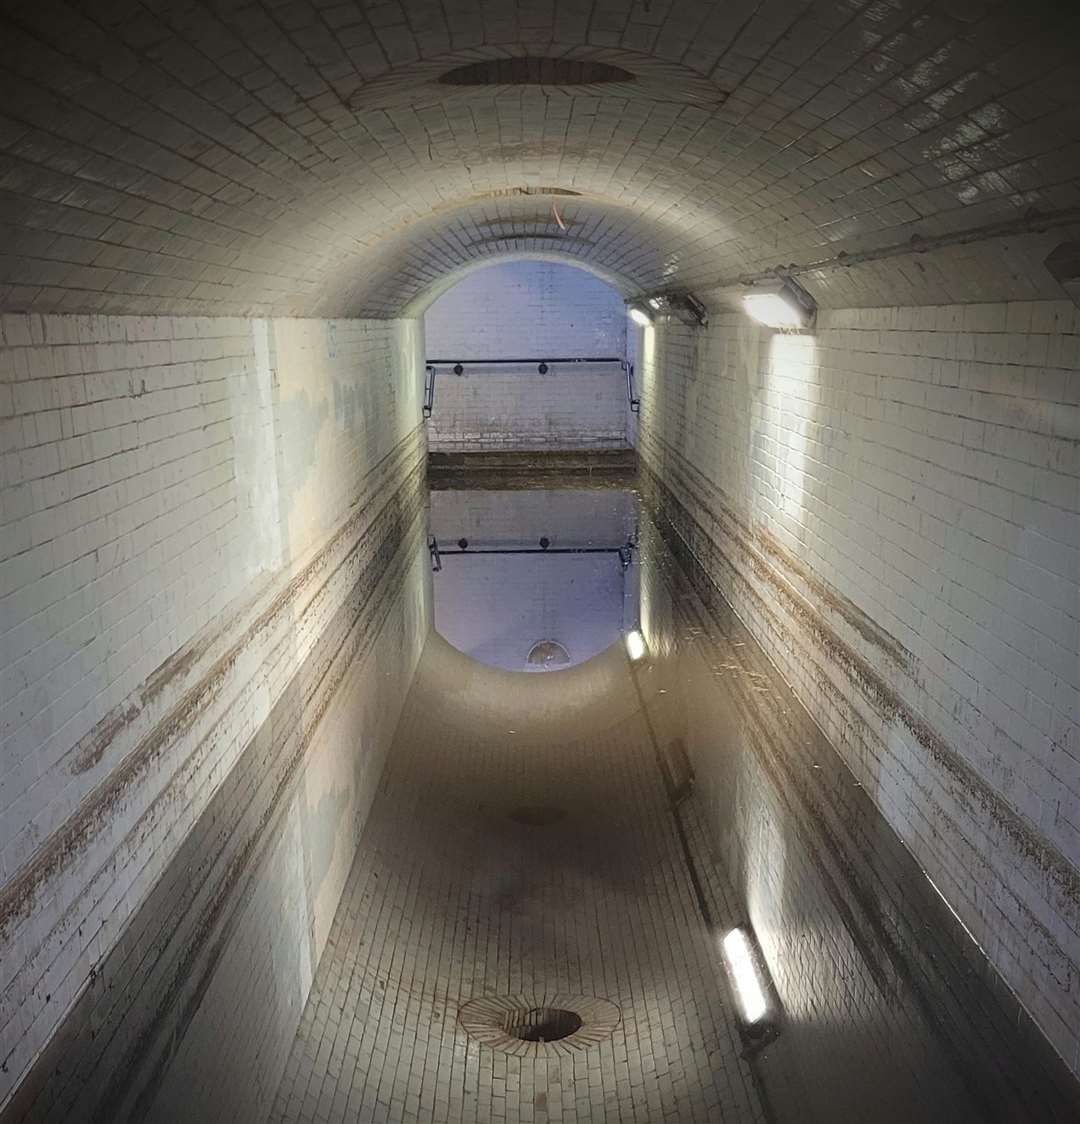 Primary school teacher and photographer Jamie Pickles captured this artistic photo of flooding in the underpass by Faversham train station. Picture: Jamie Pickles